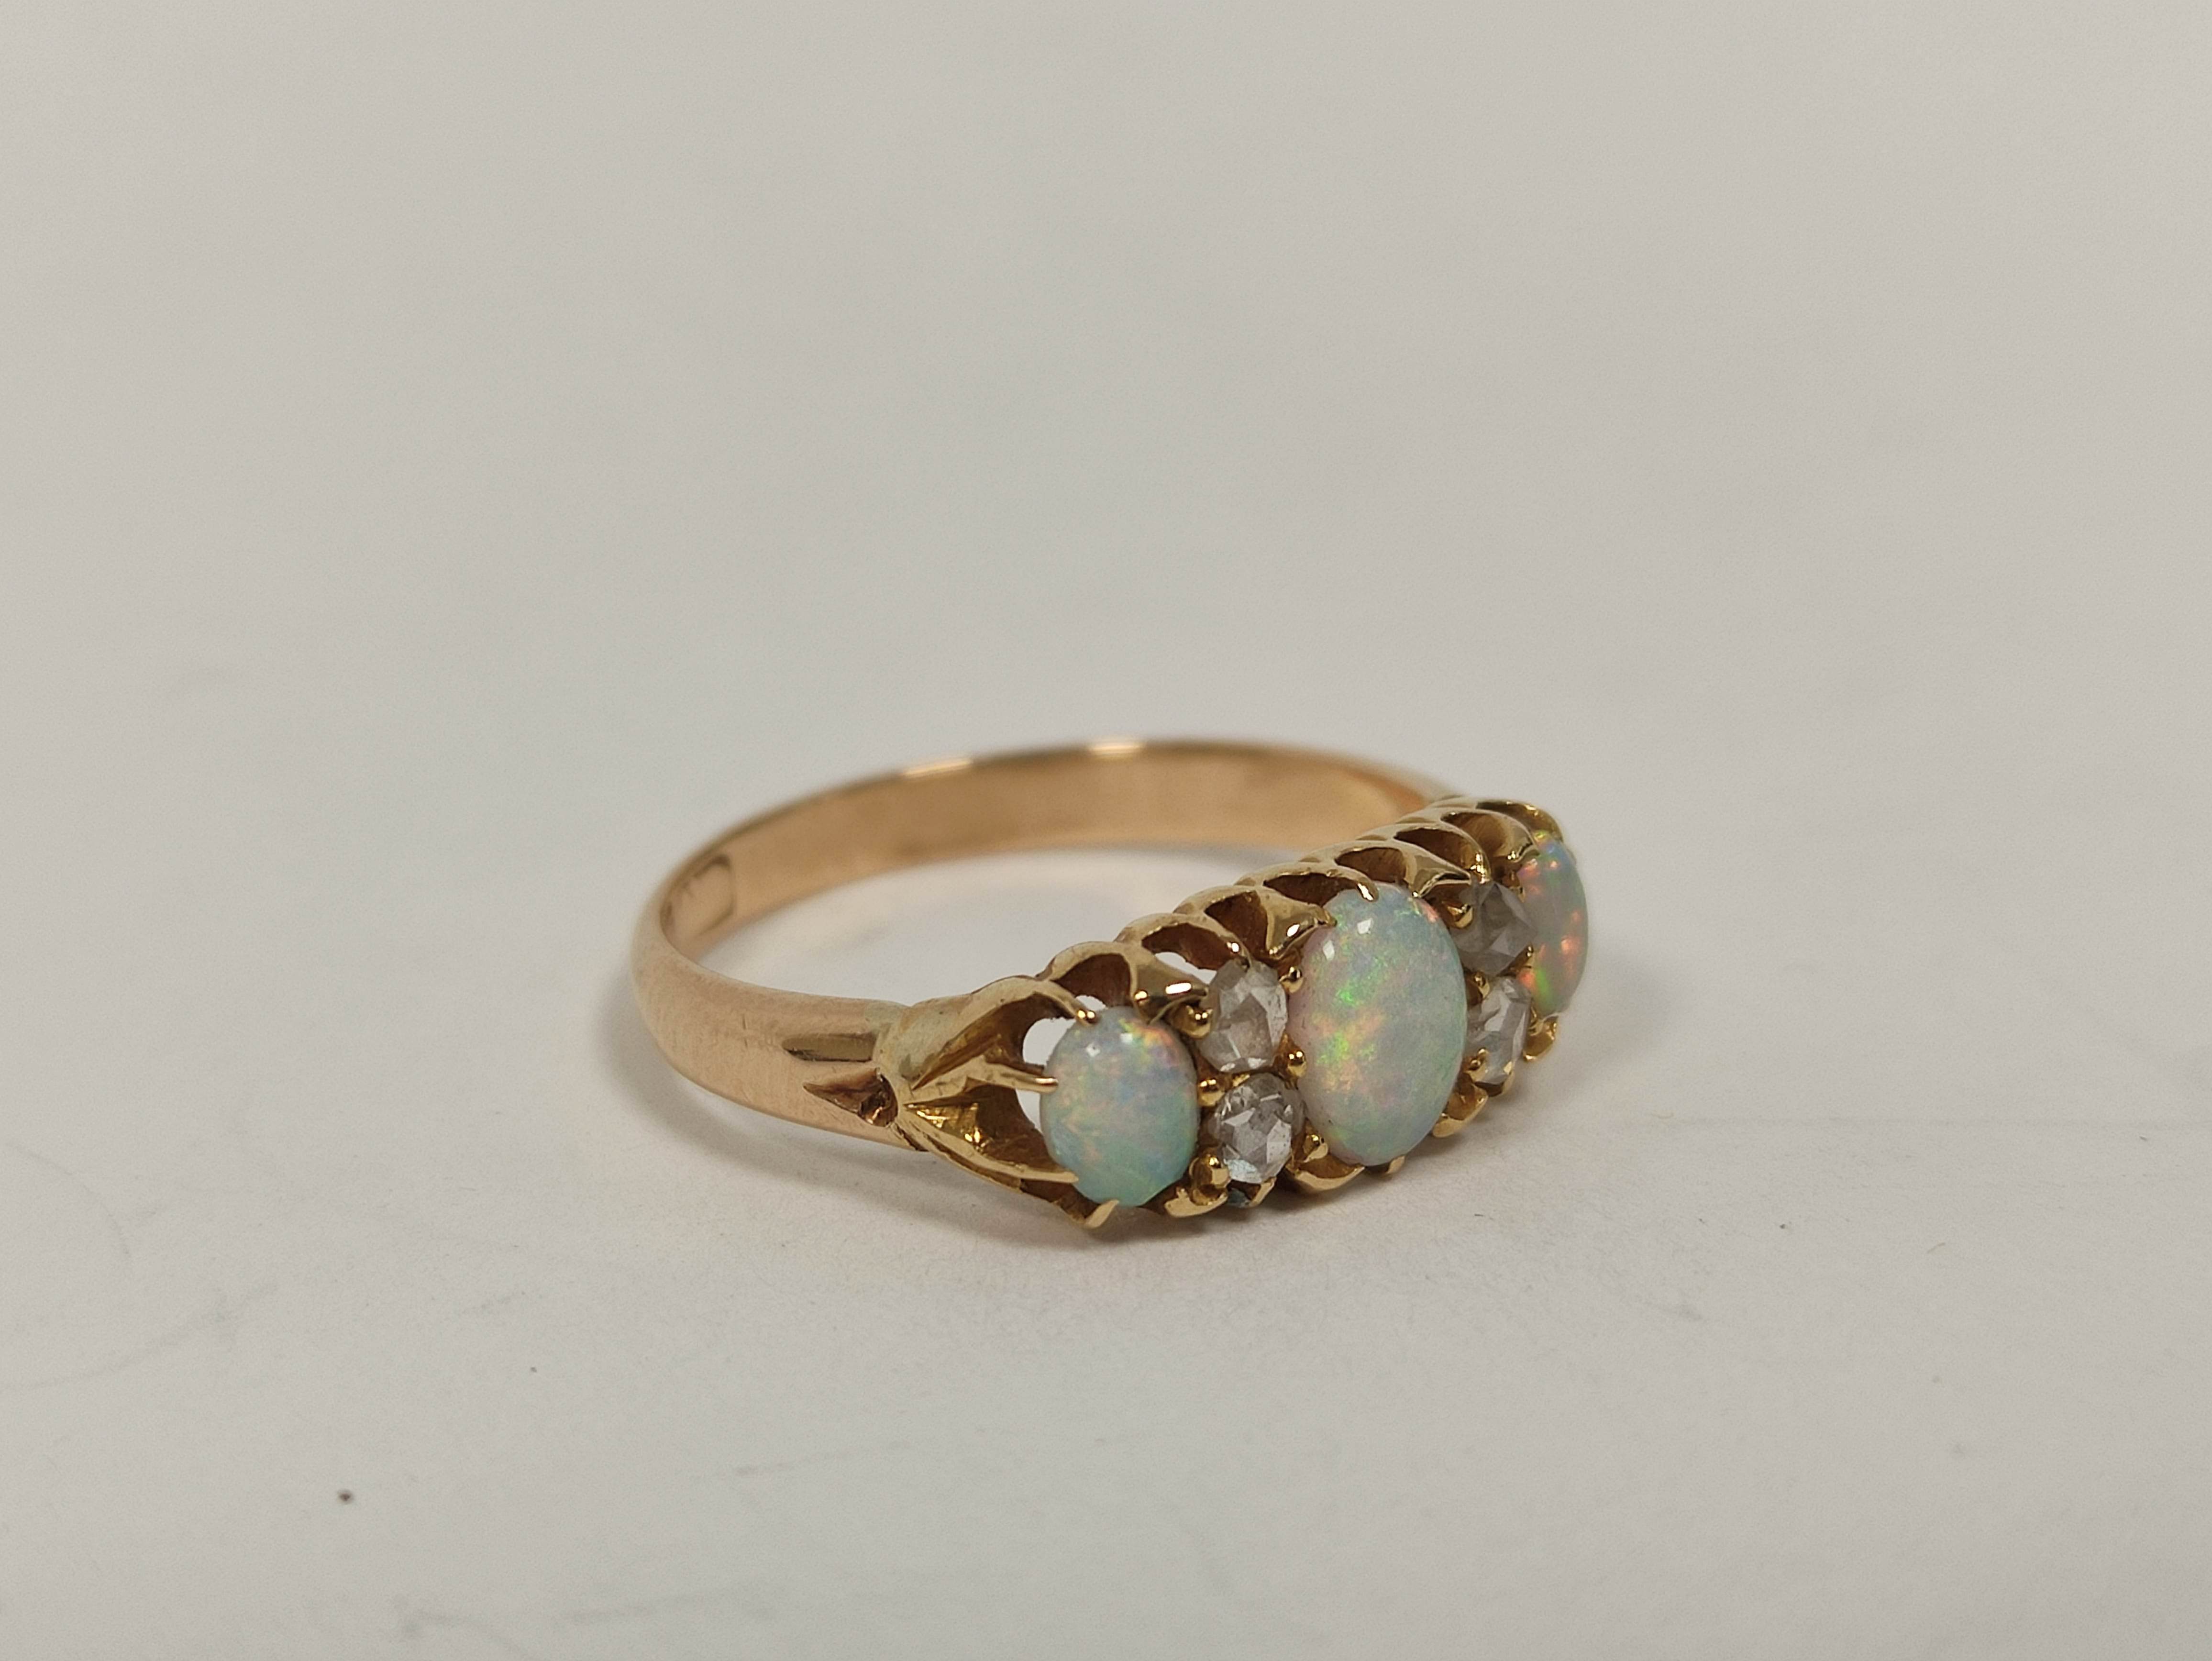 Gold ring with three opals and diamond points, probably 9ct. Size 'M'.